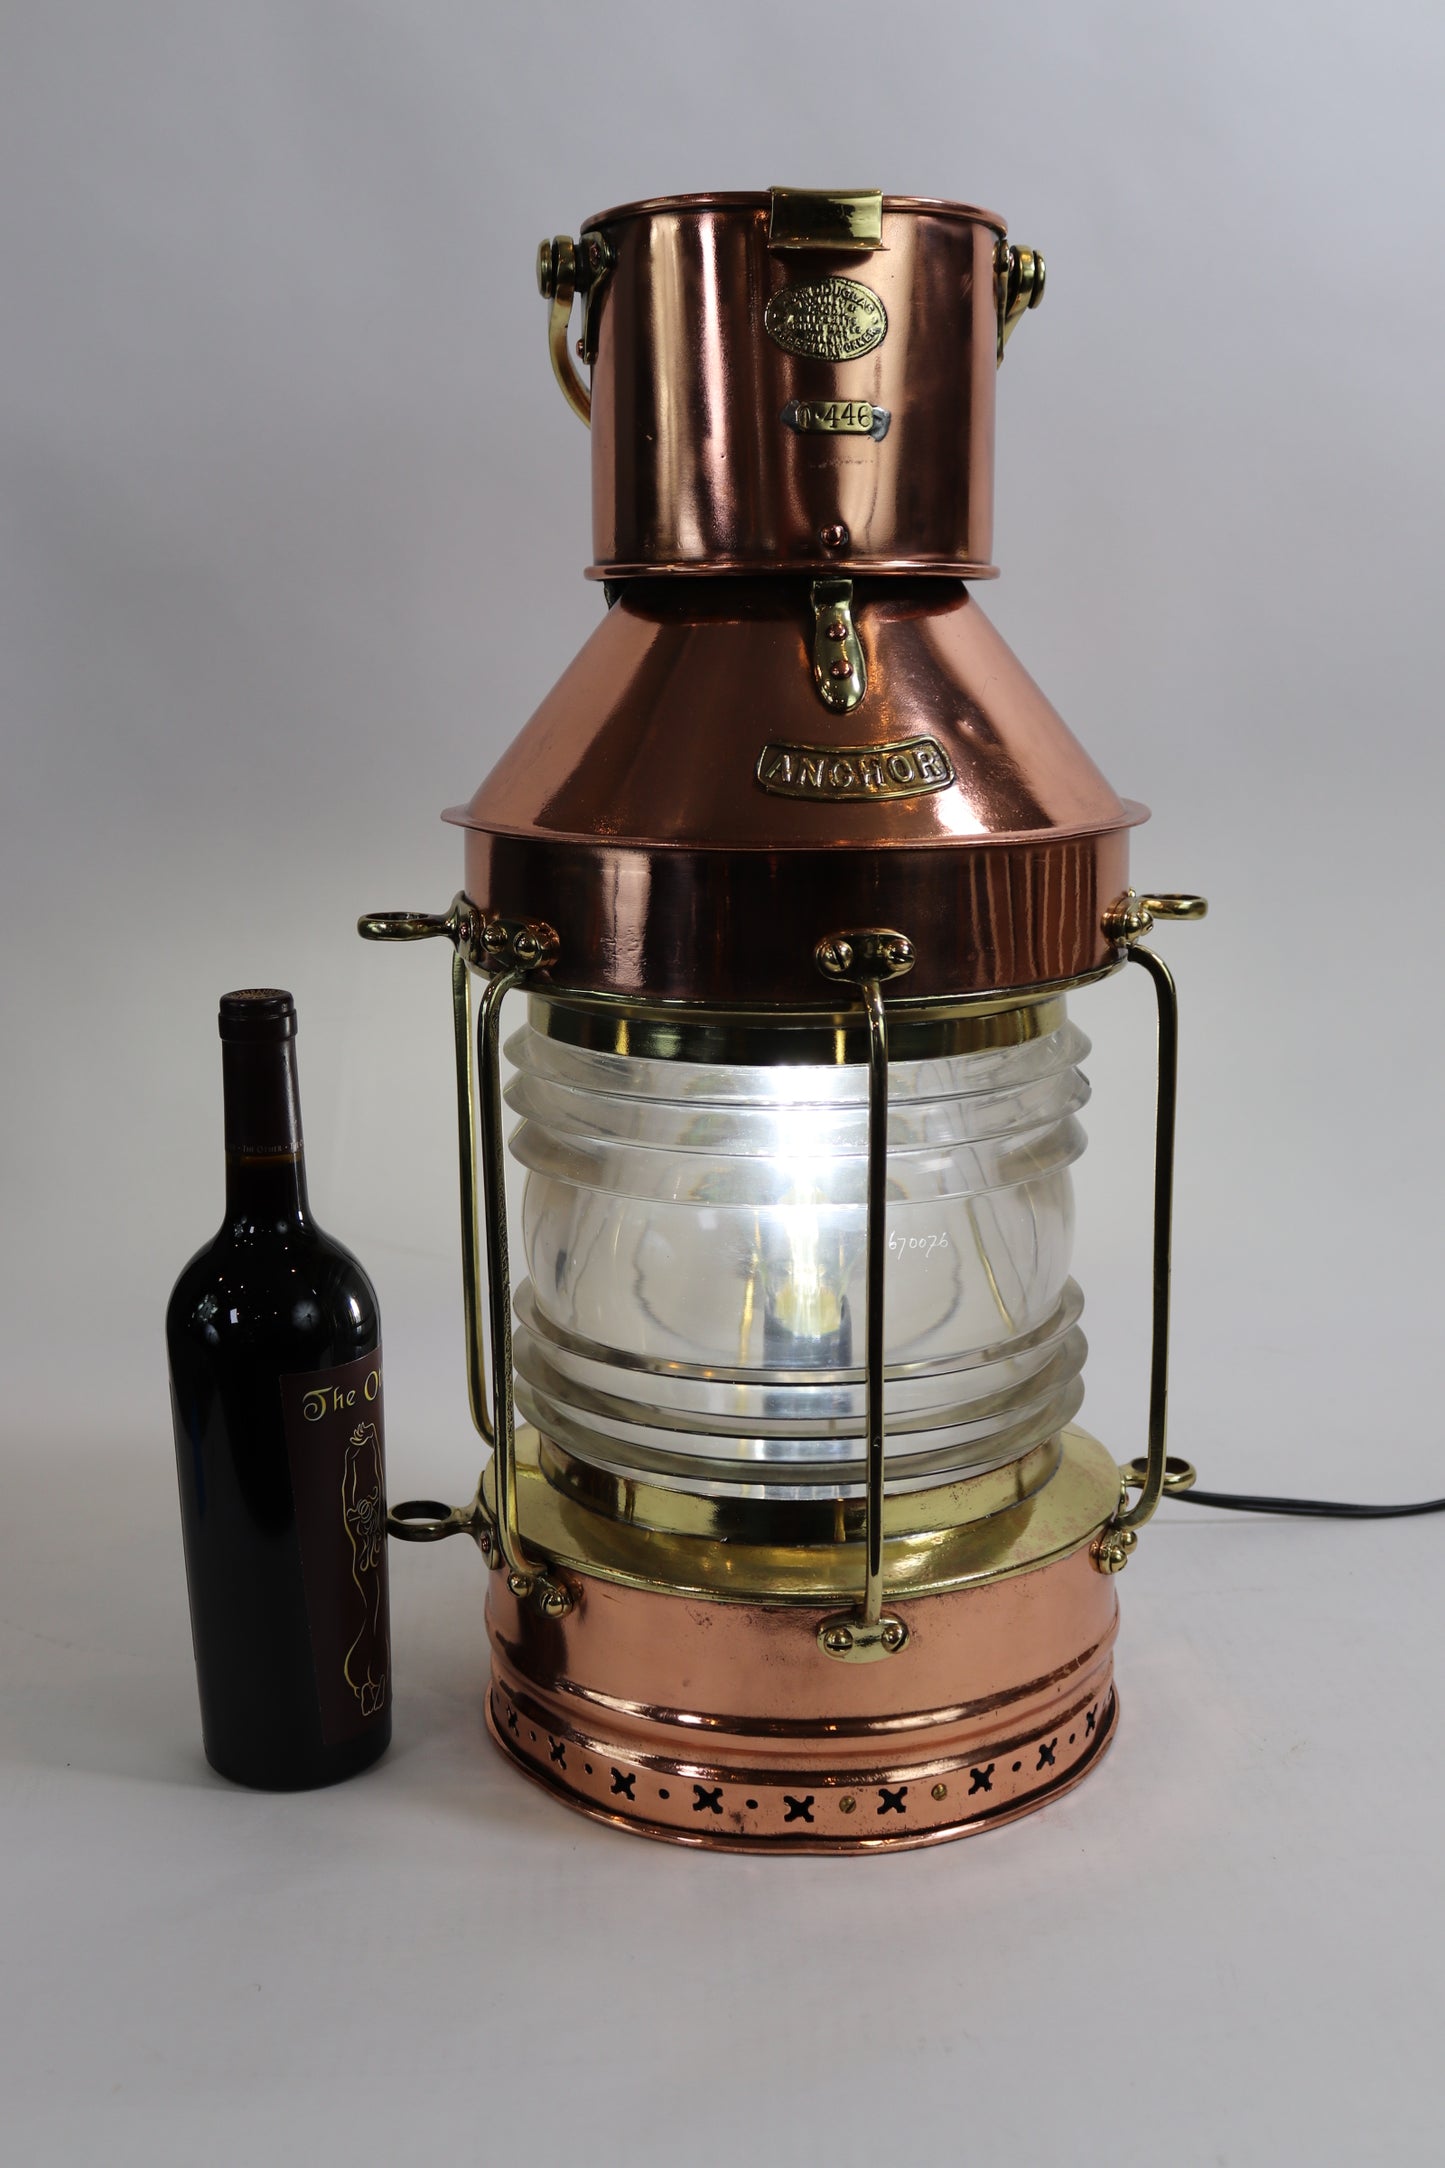 Large Copper Ships Lantern by Douglas of Liverpool - Lannan Gallery